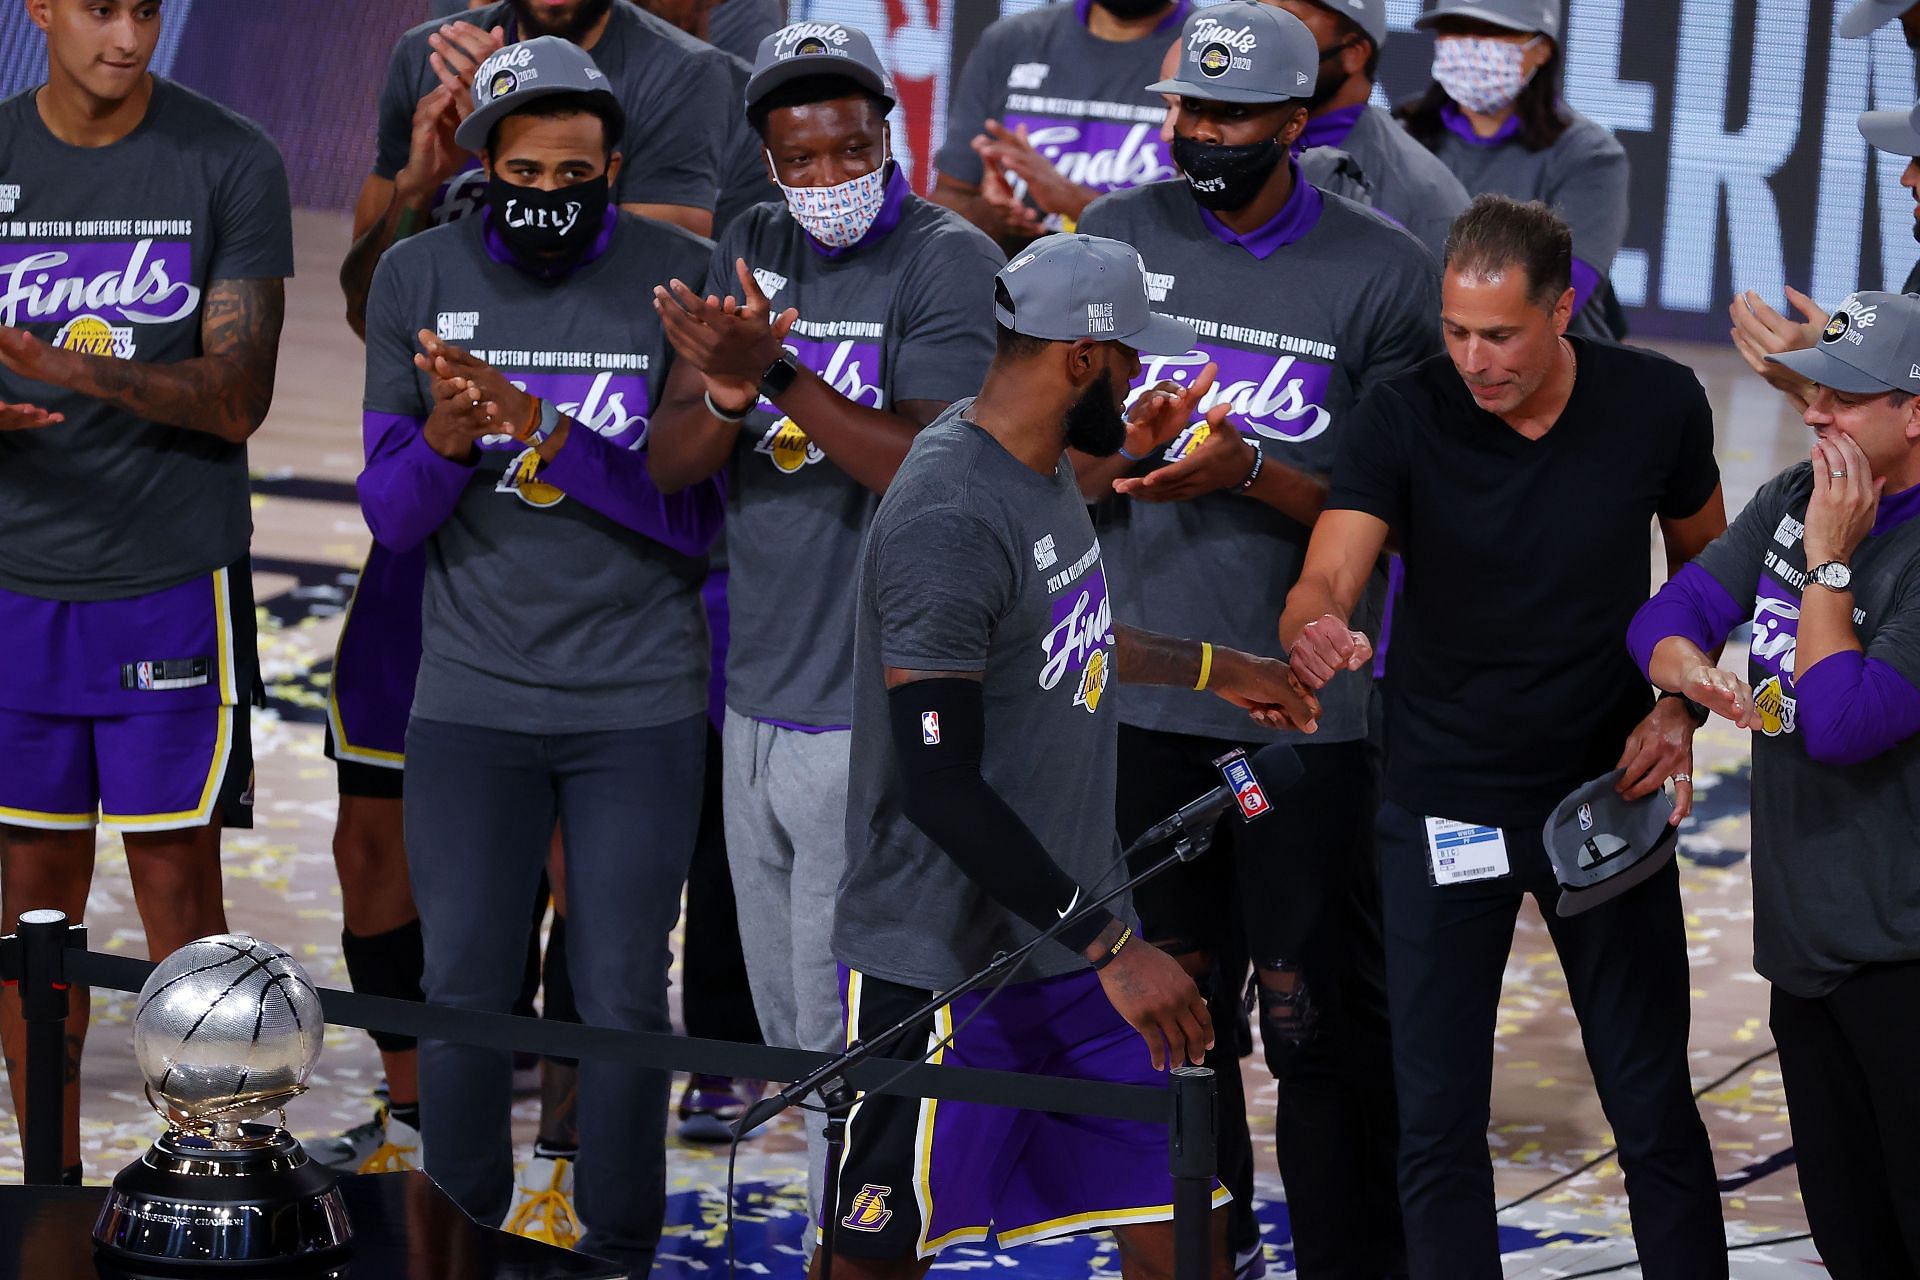 LeBron James and Rob Pelinka celebrate the LA Lakers winning Conference Finals against Denver Nuggets in NBA Playoffs 2020